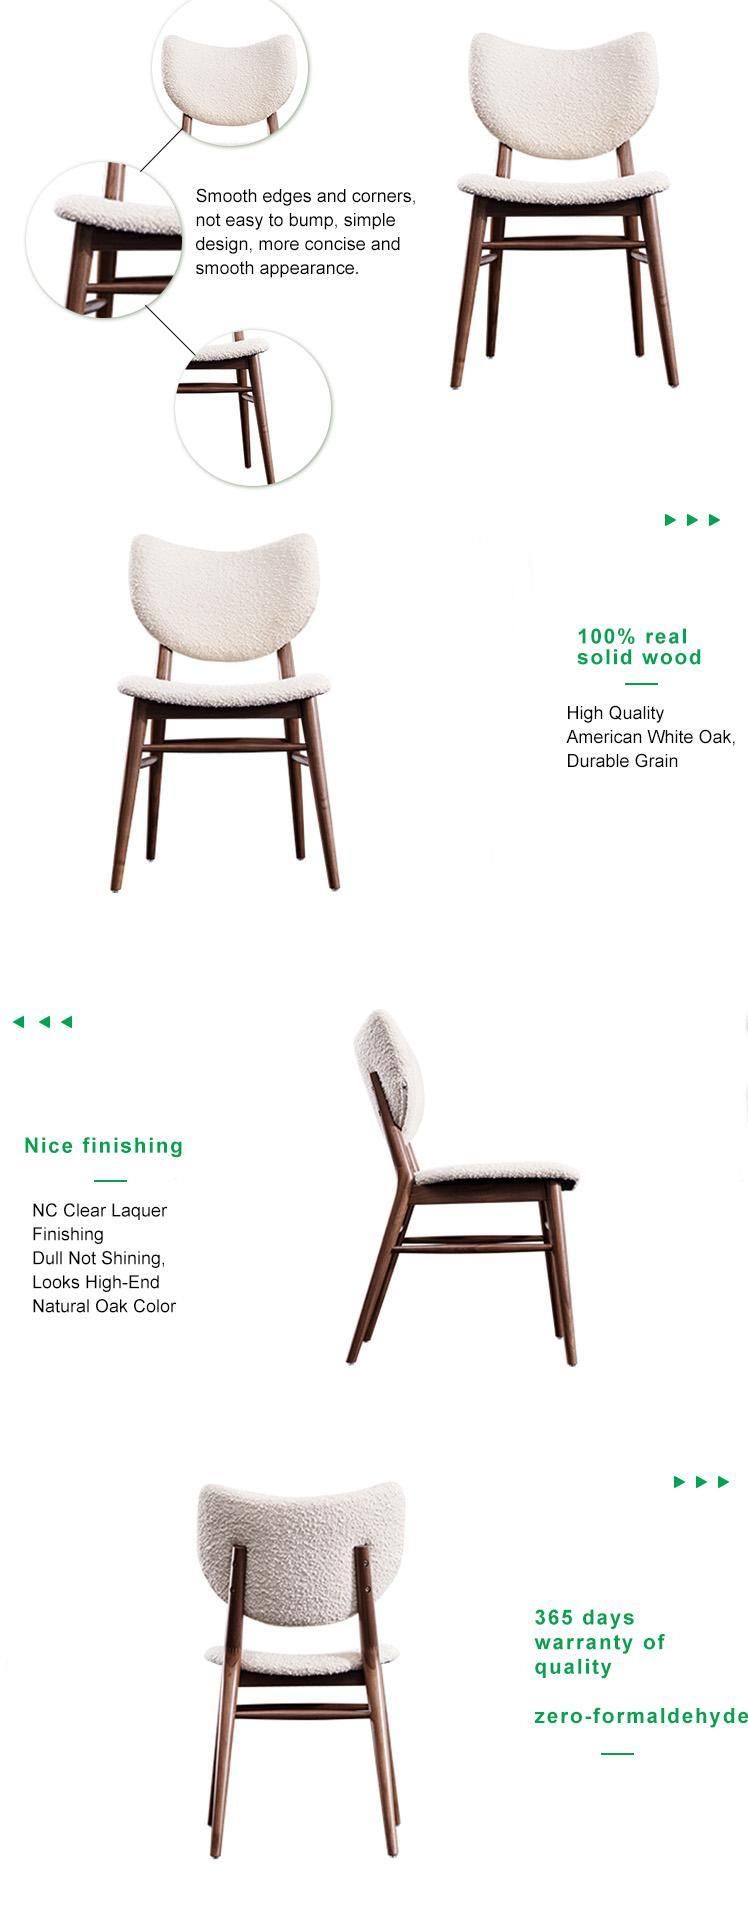 Furniture Modern Furniture Chair Home Furniture Wood Furniture Antique White PU Leather Cushion Nordic Dining Room Chair with Wooden Legs